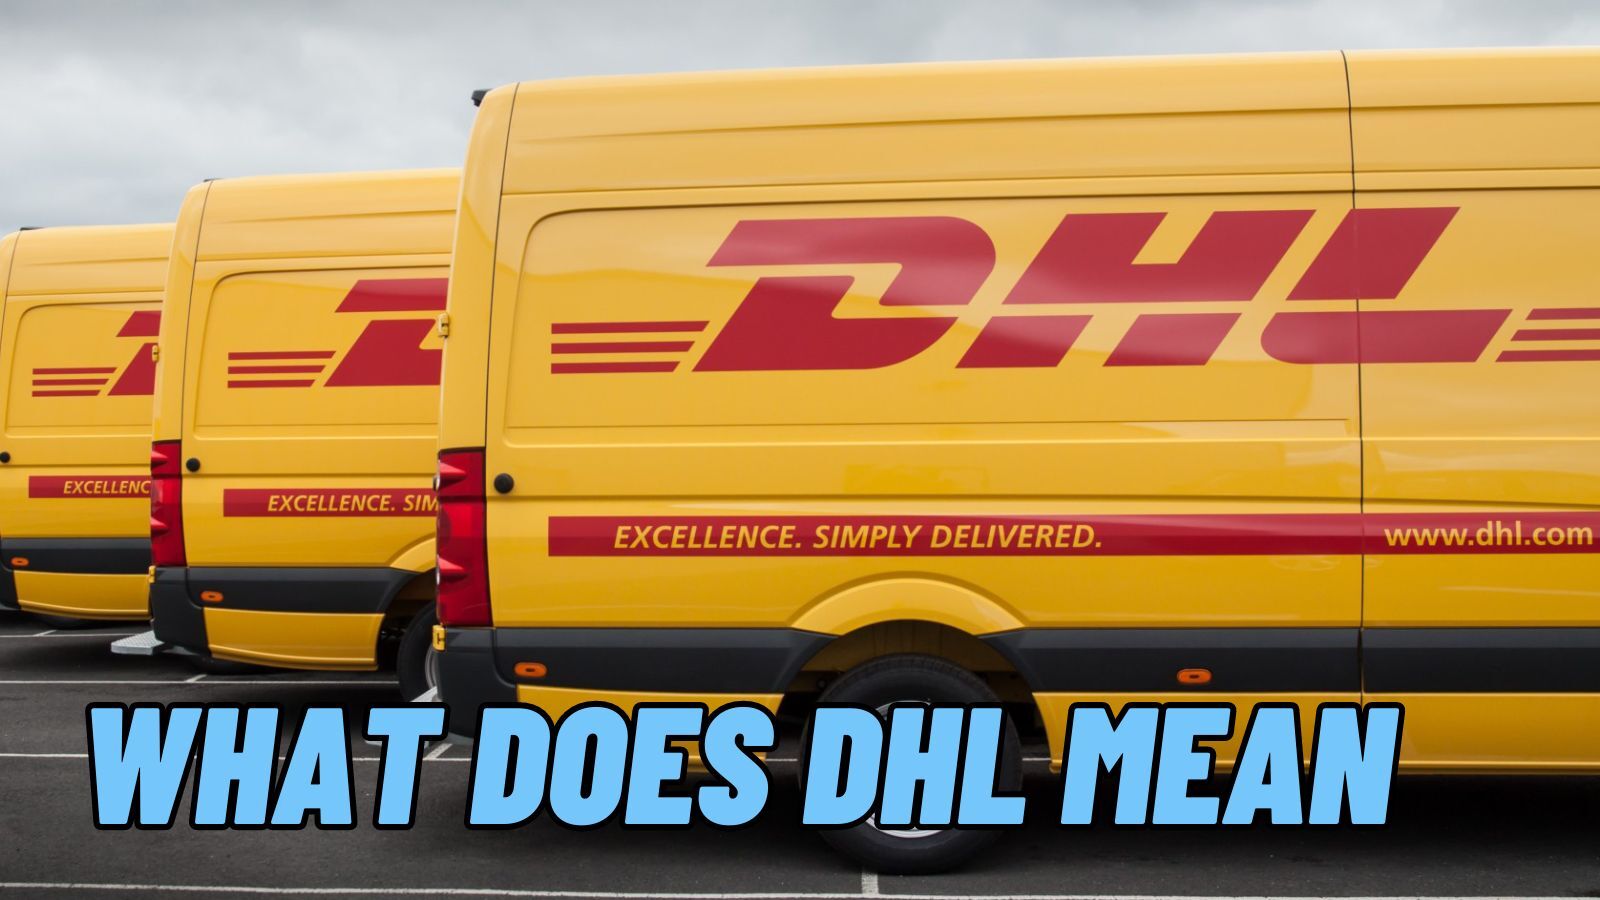 What Does DHL Mean? (Founding History, Corporate Culture and More)